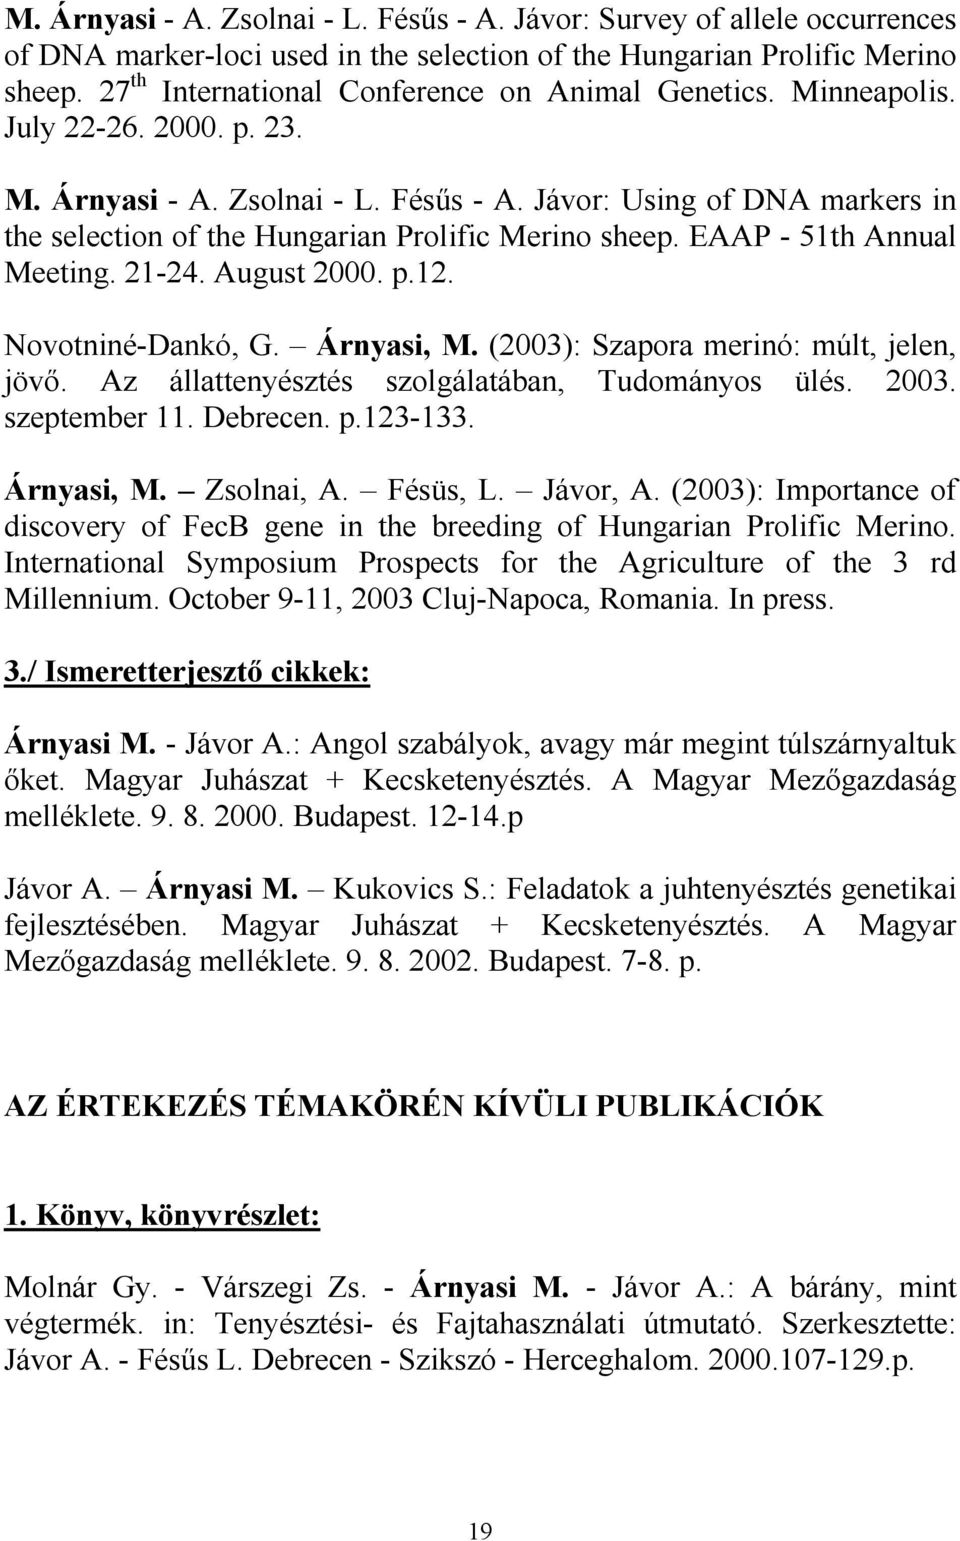 Jávor: Using of DNA markers in the selection of the Hungarian Prolific Merino sheep. EAAP - 51th Annual Meeting. 21-24. August 2000. p.12. Novotniné-Dankó, G. Árnyasi, M.